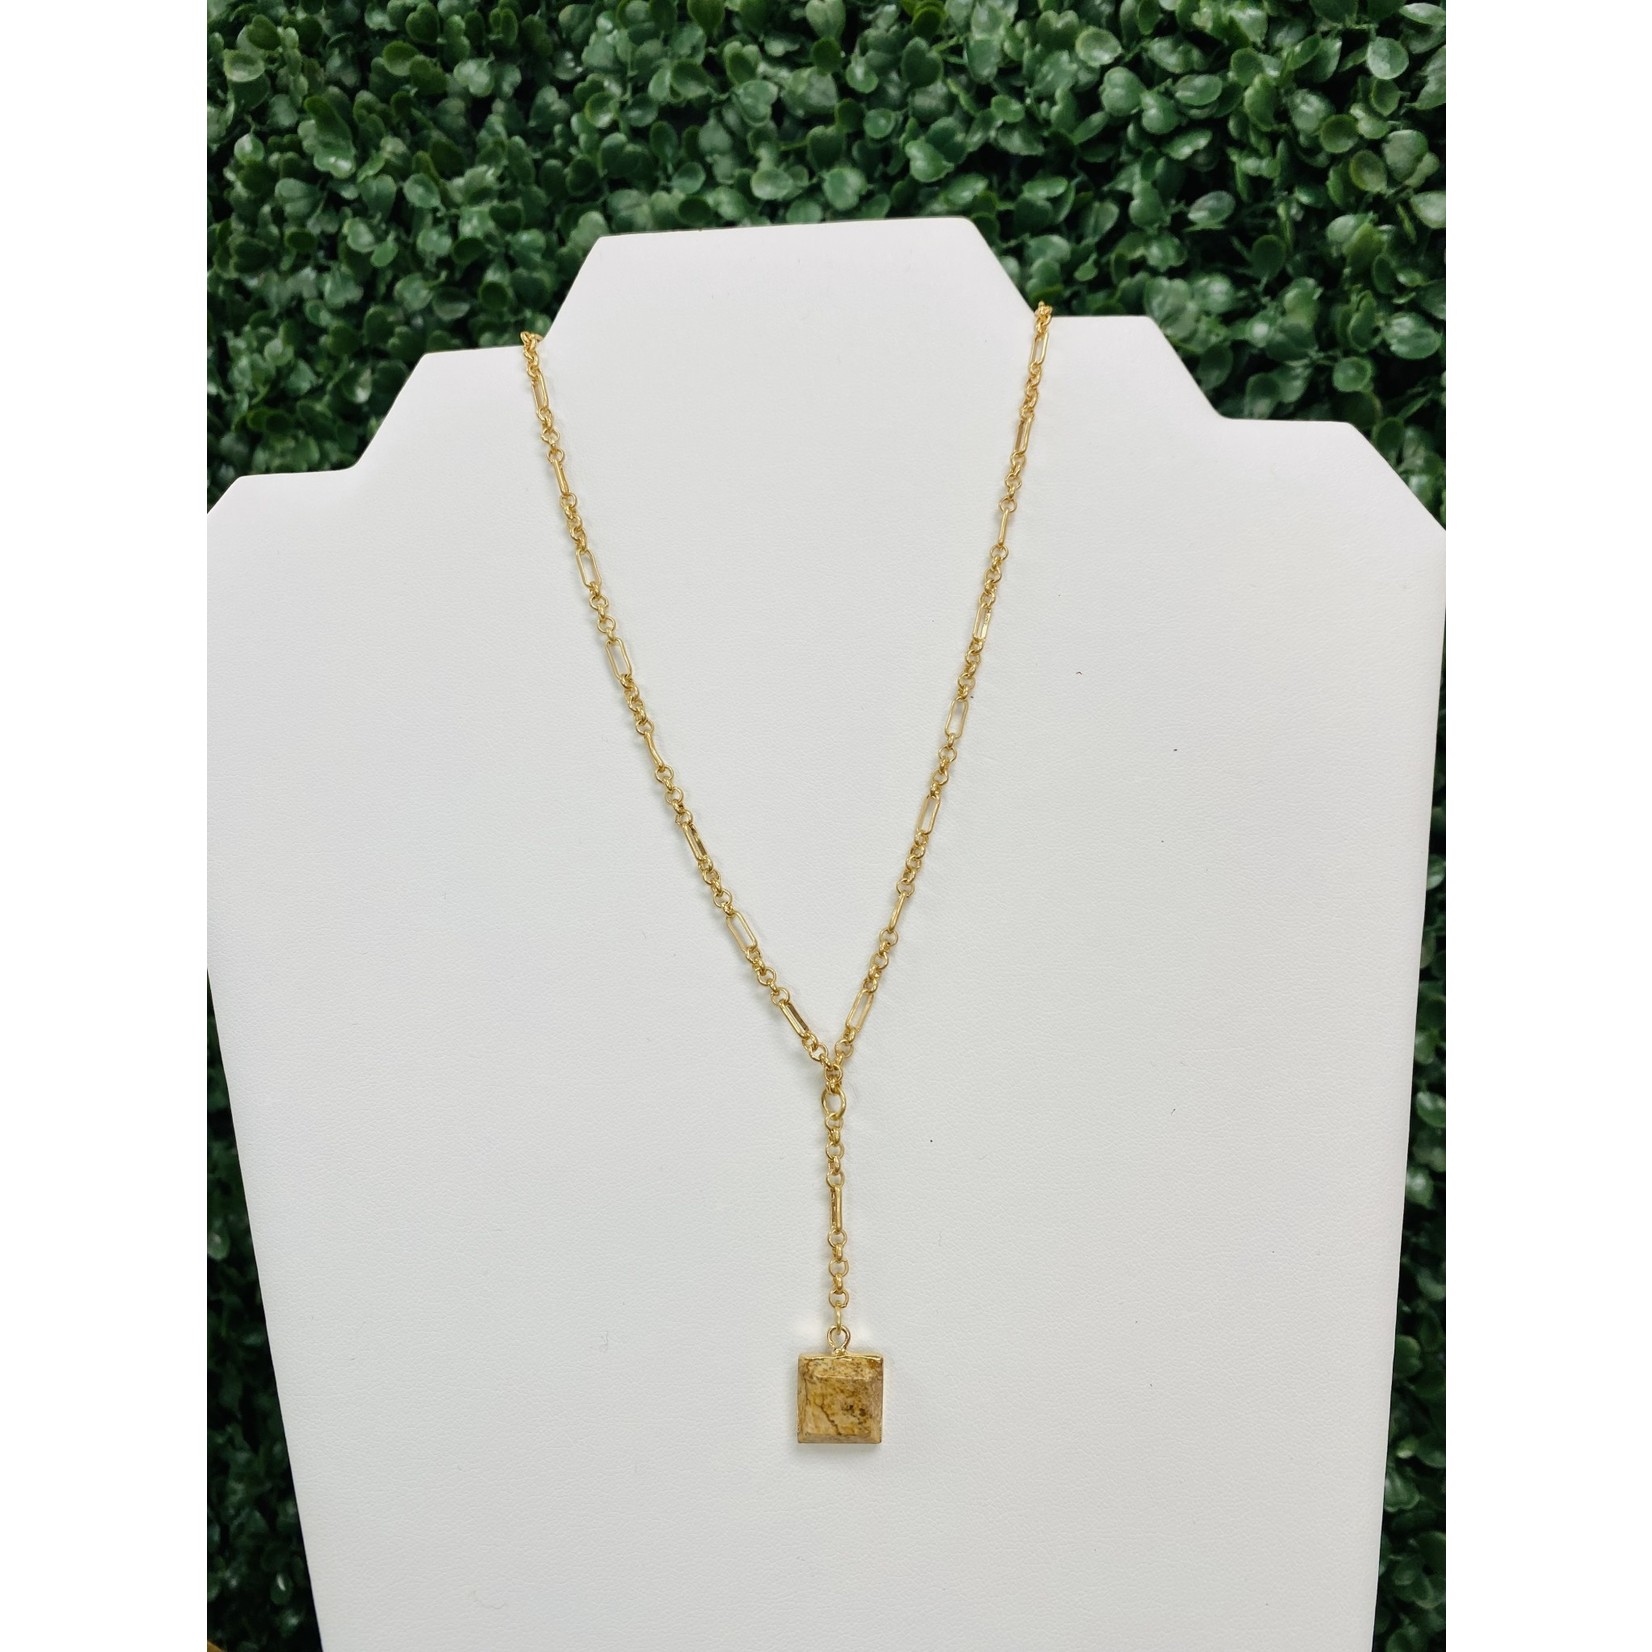 Sweet Lola Gemma - Y Gold Chain With Square Natural Gemstone